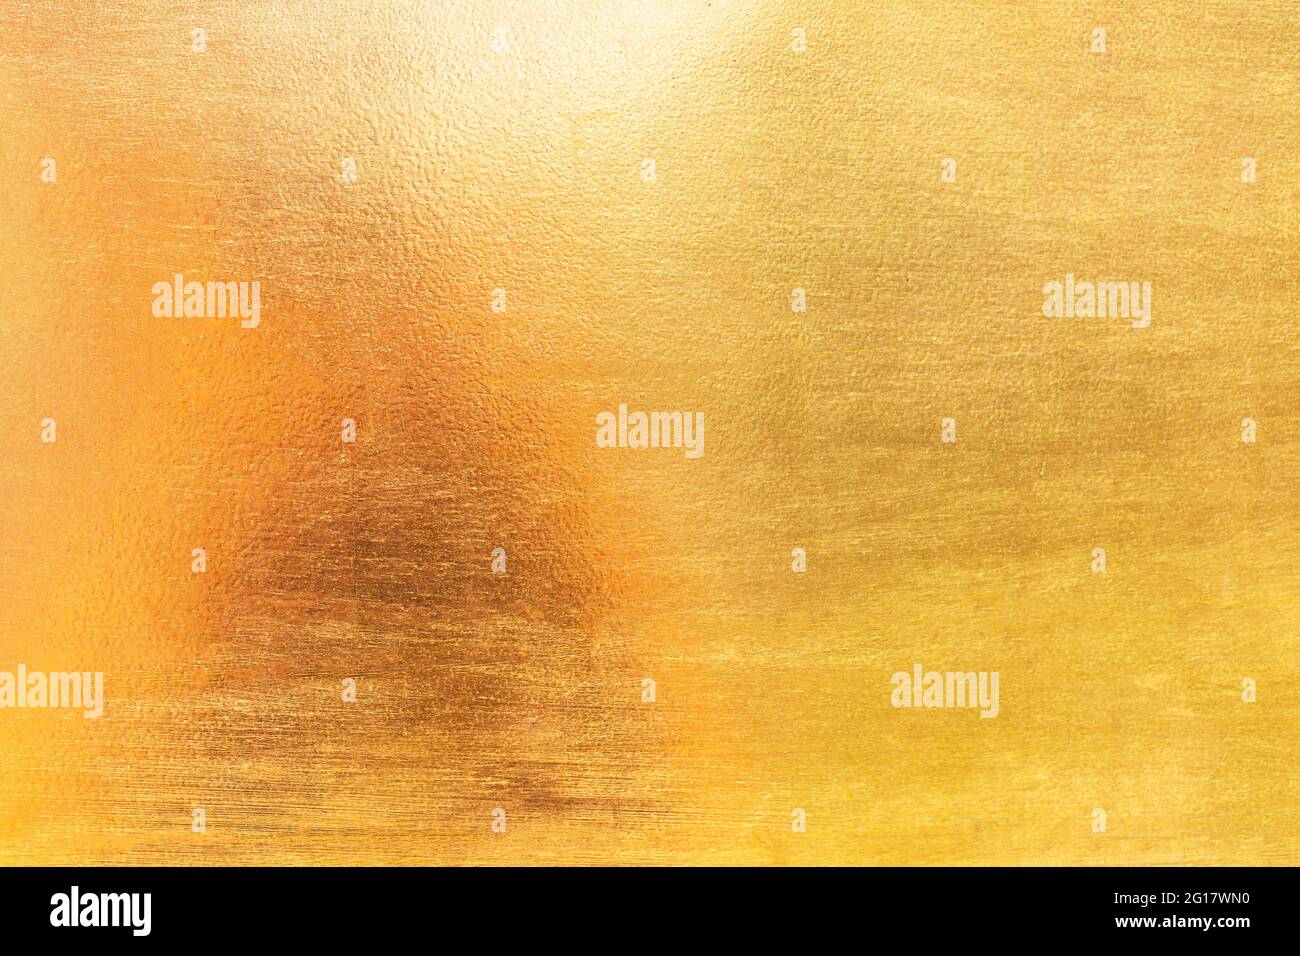 Gold abstract background or texture and gradients shadow. Stock Photo